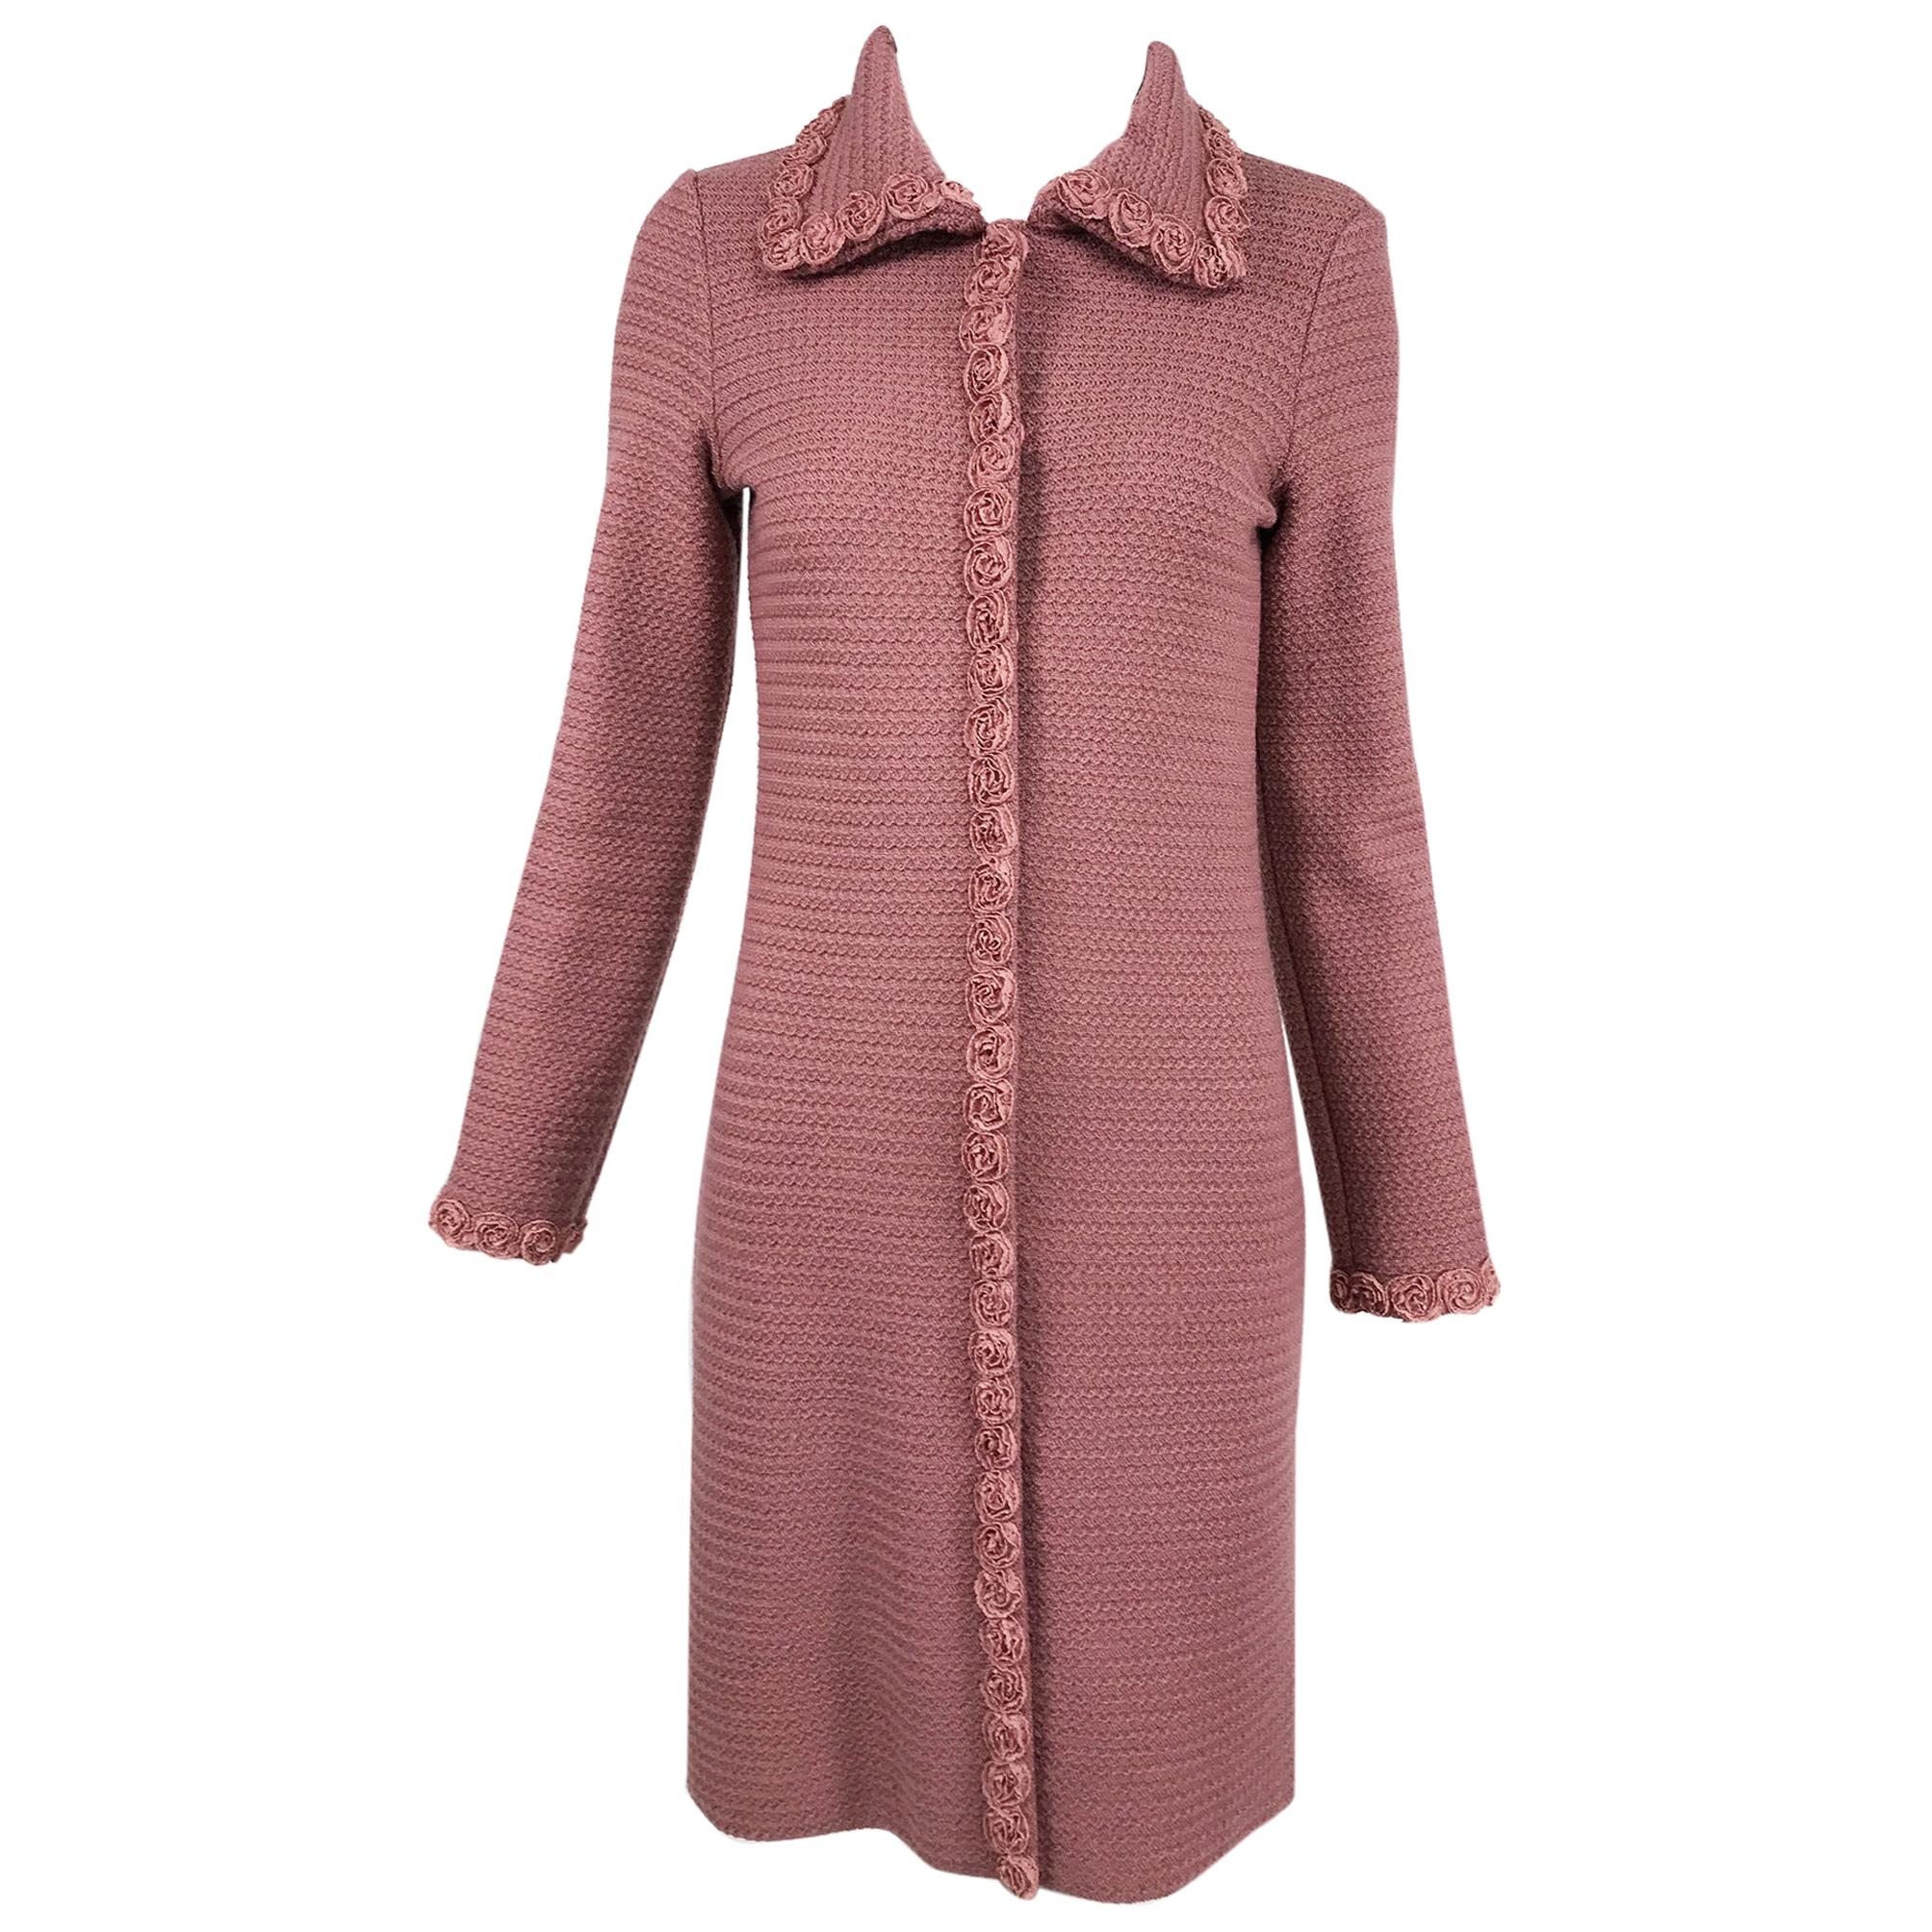 Moschino Pink Wool Knit Coat with Rosette Lace Trims